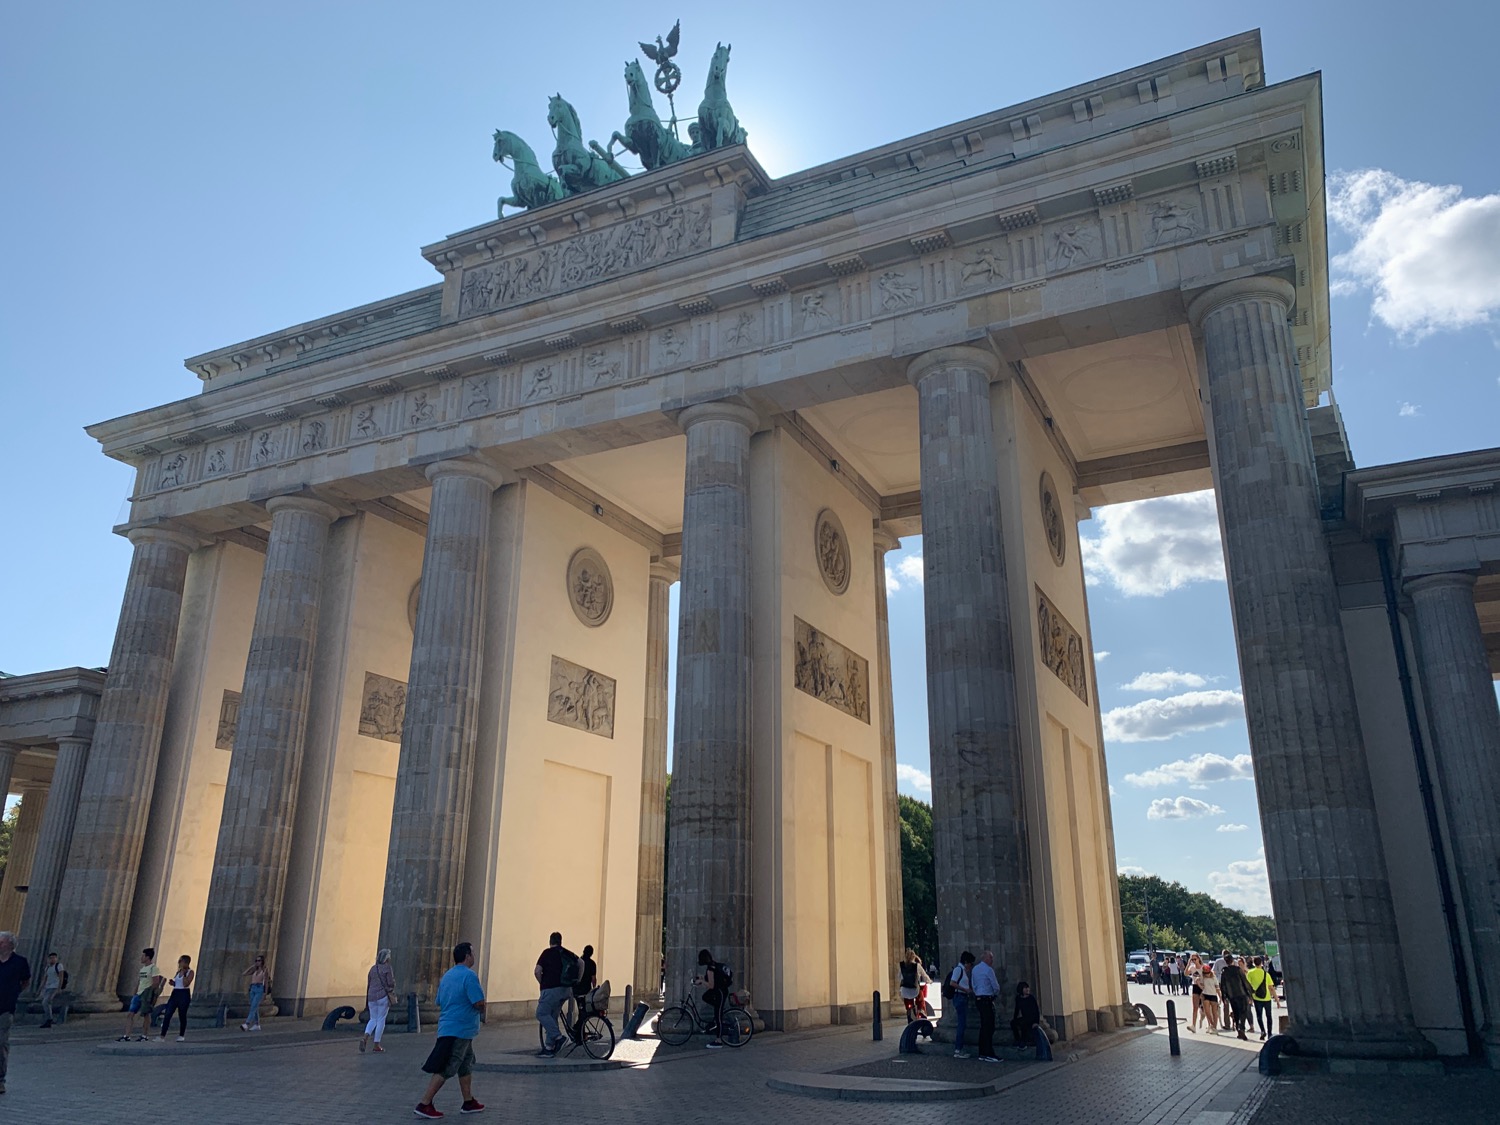 a large stone structure with columns and statues on top with Brandenburg Gate in the background